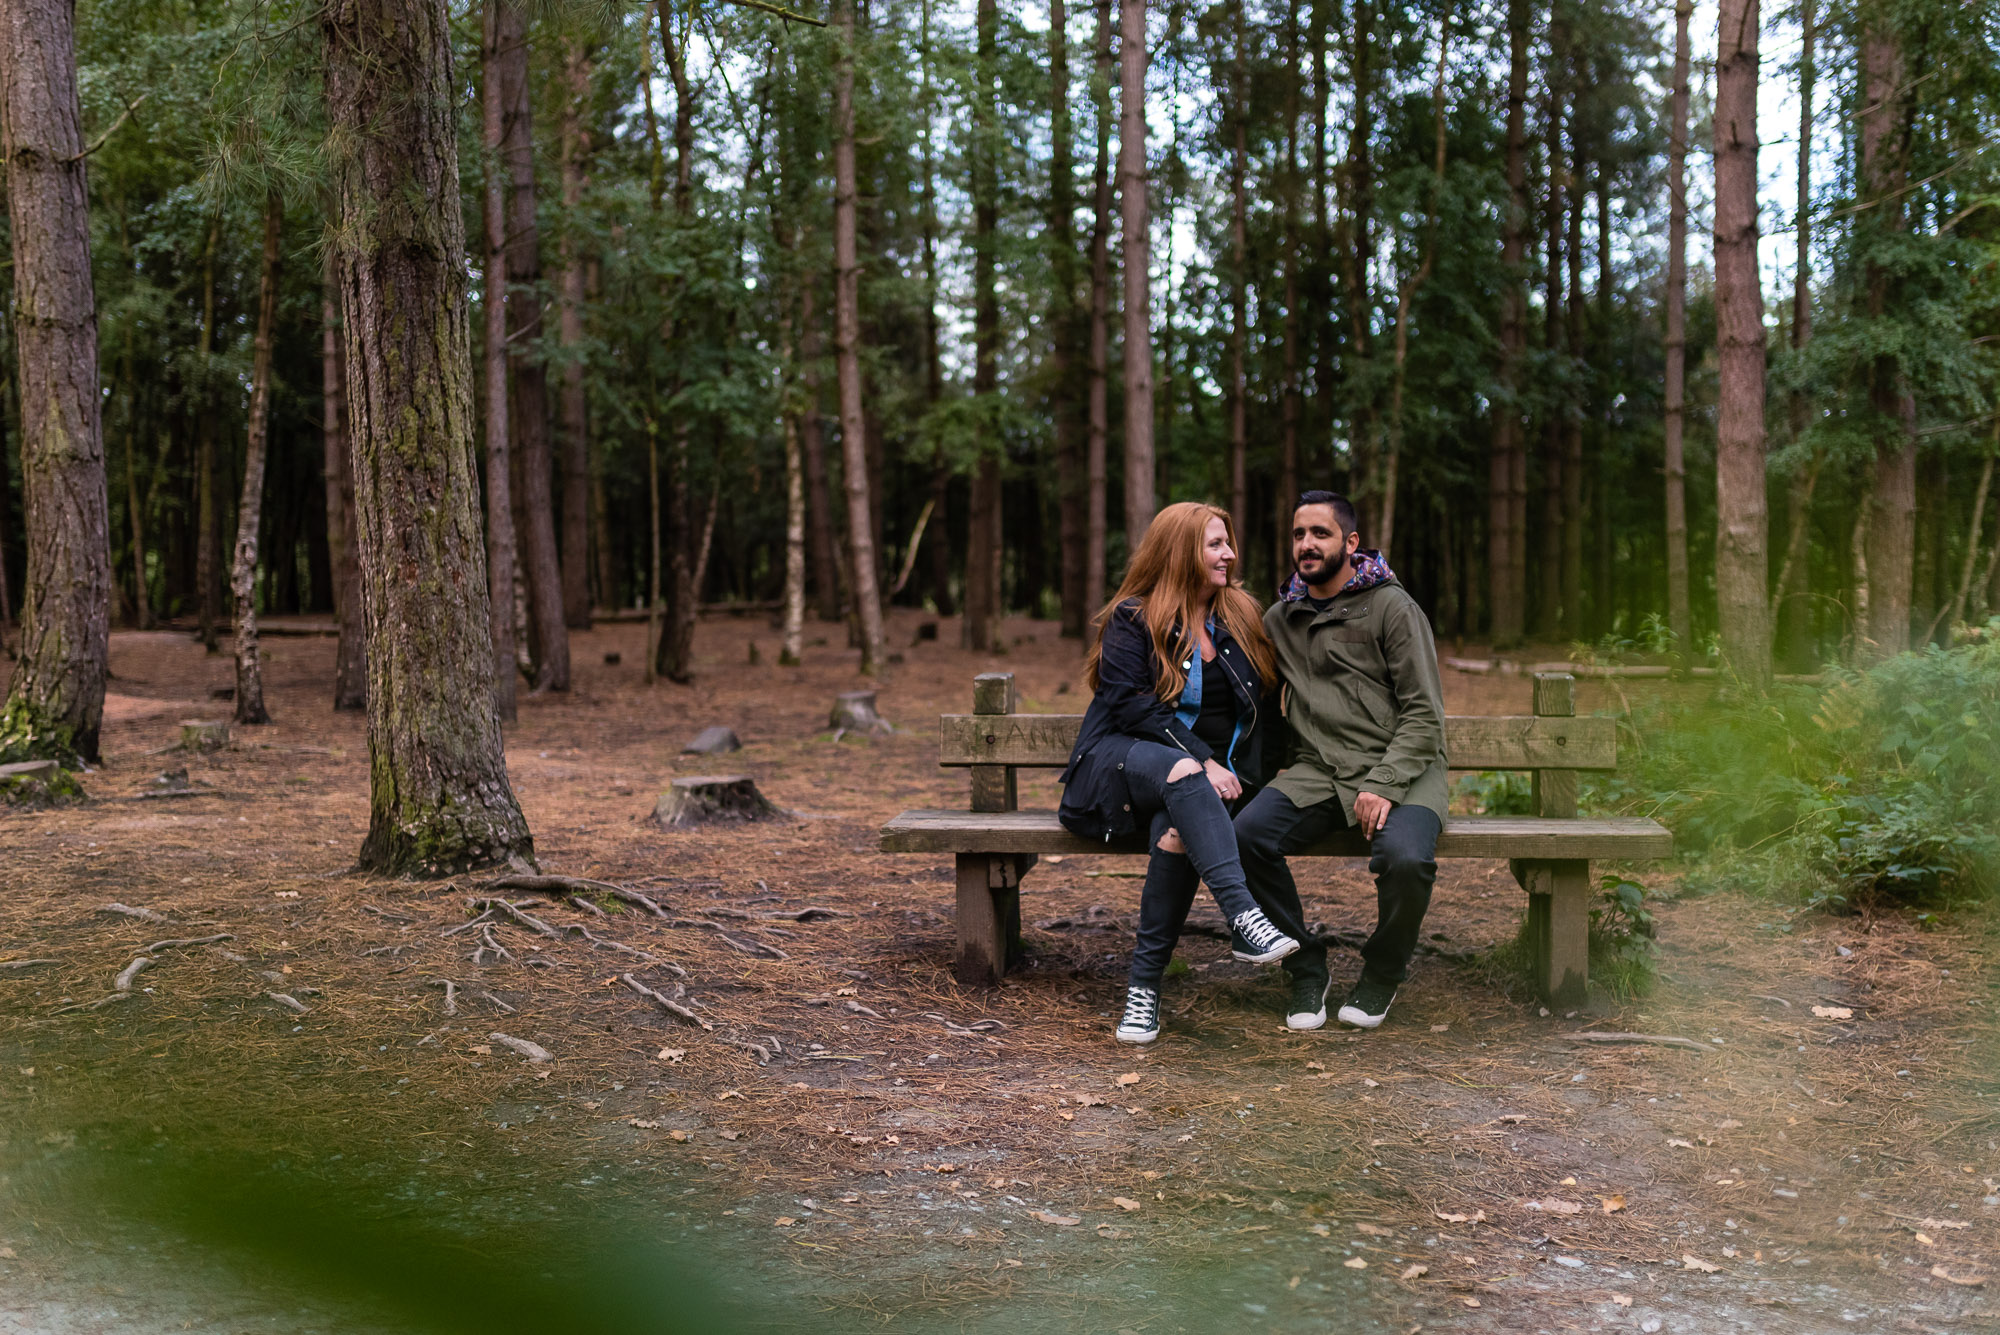 Sitting on a bench Delamere Forest Pre-shoot